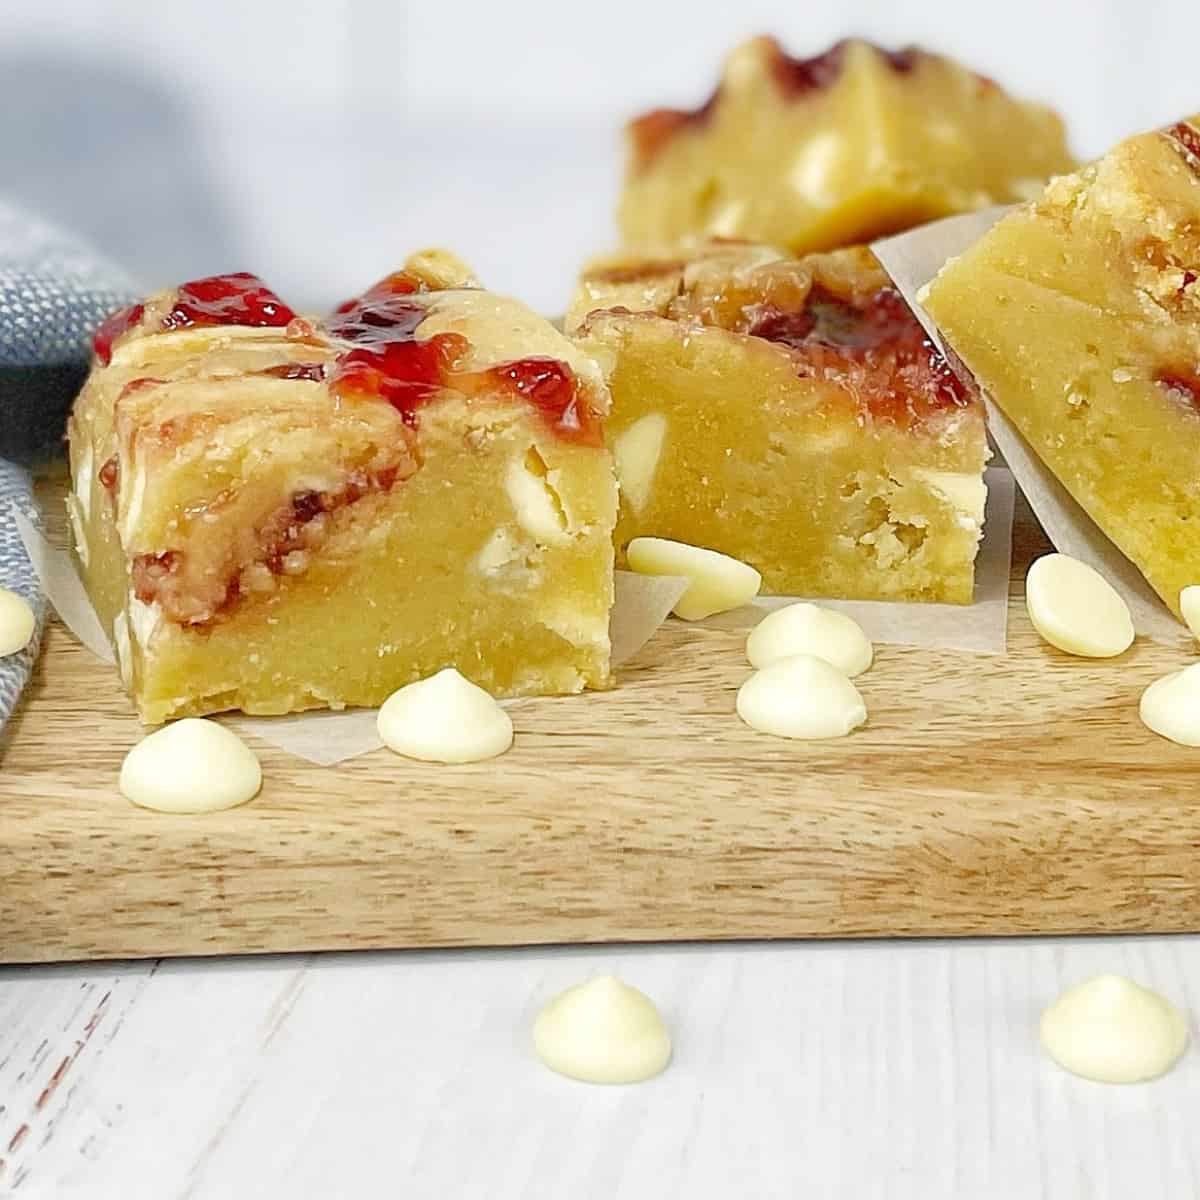 blondies swirled with raspberry jam on a wooden board scattered with white chocolate chips